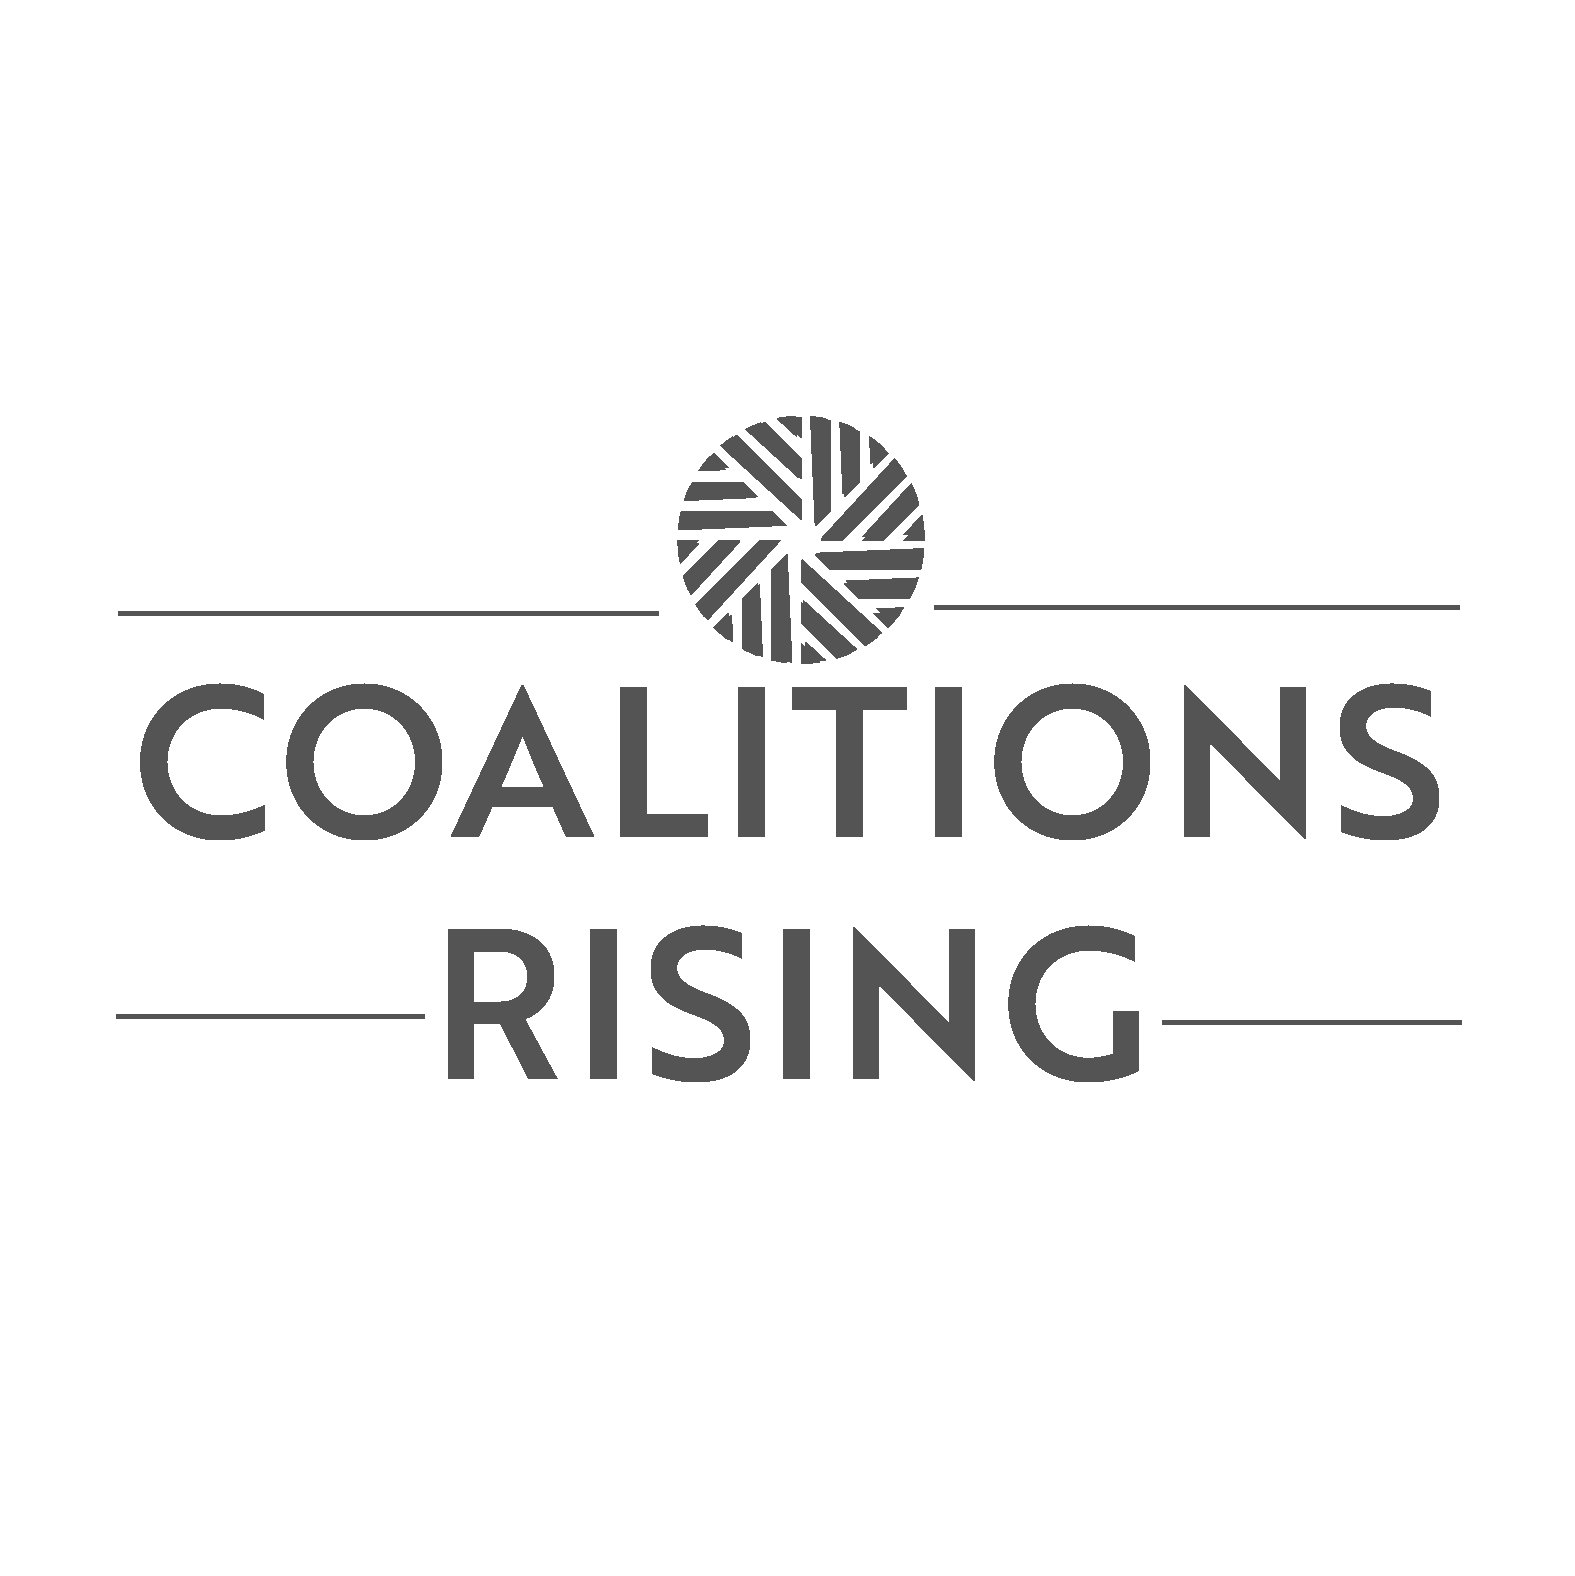 Coalitions Rising, Prevention Action Alliance, Client of Brandi Lust